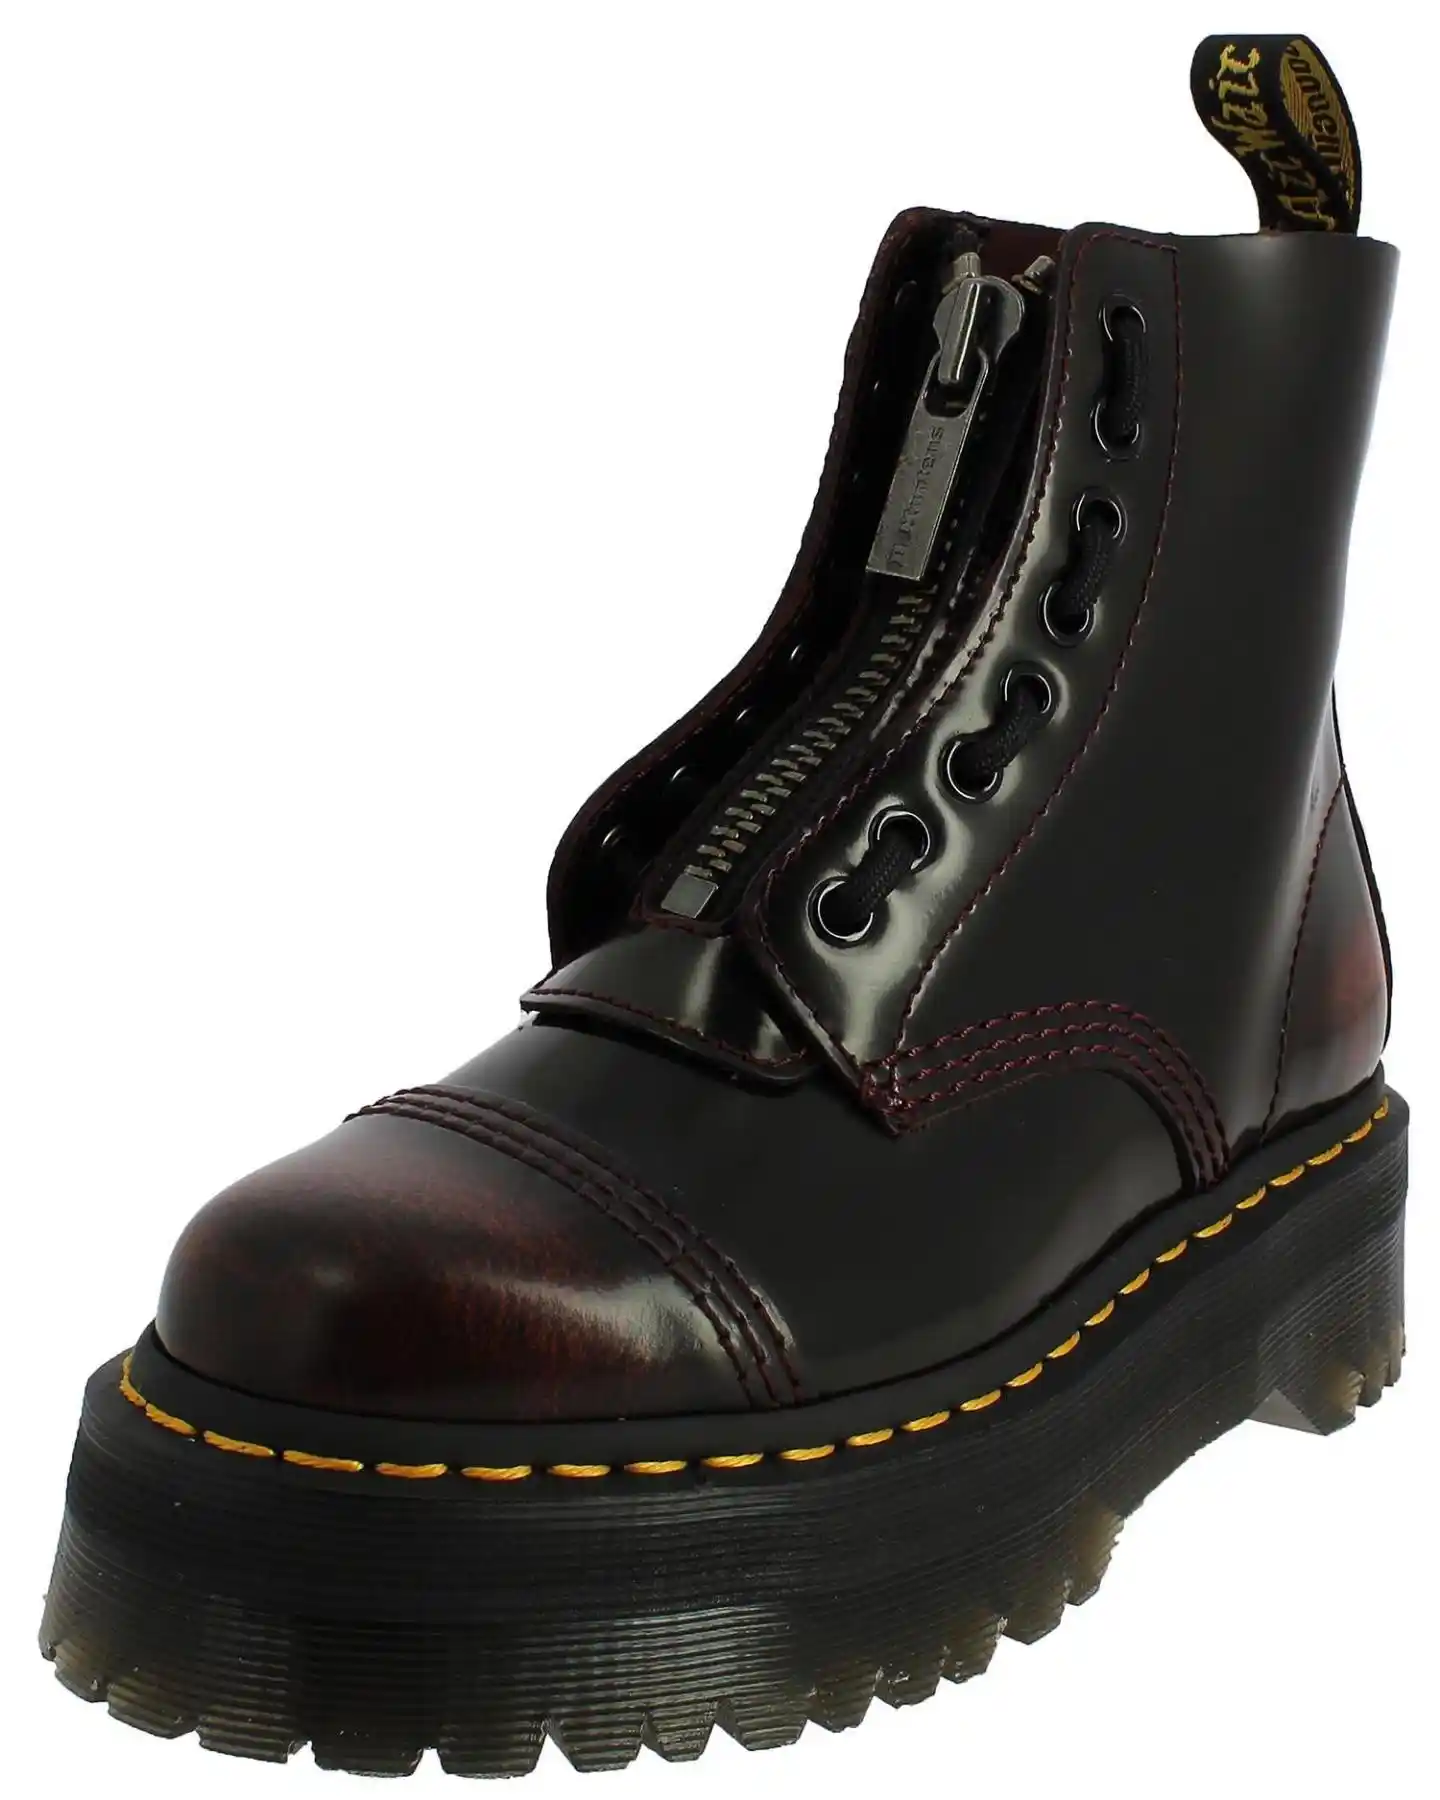 Aliexpress Dr Martens Boots on Sale, 54% OFF